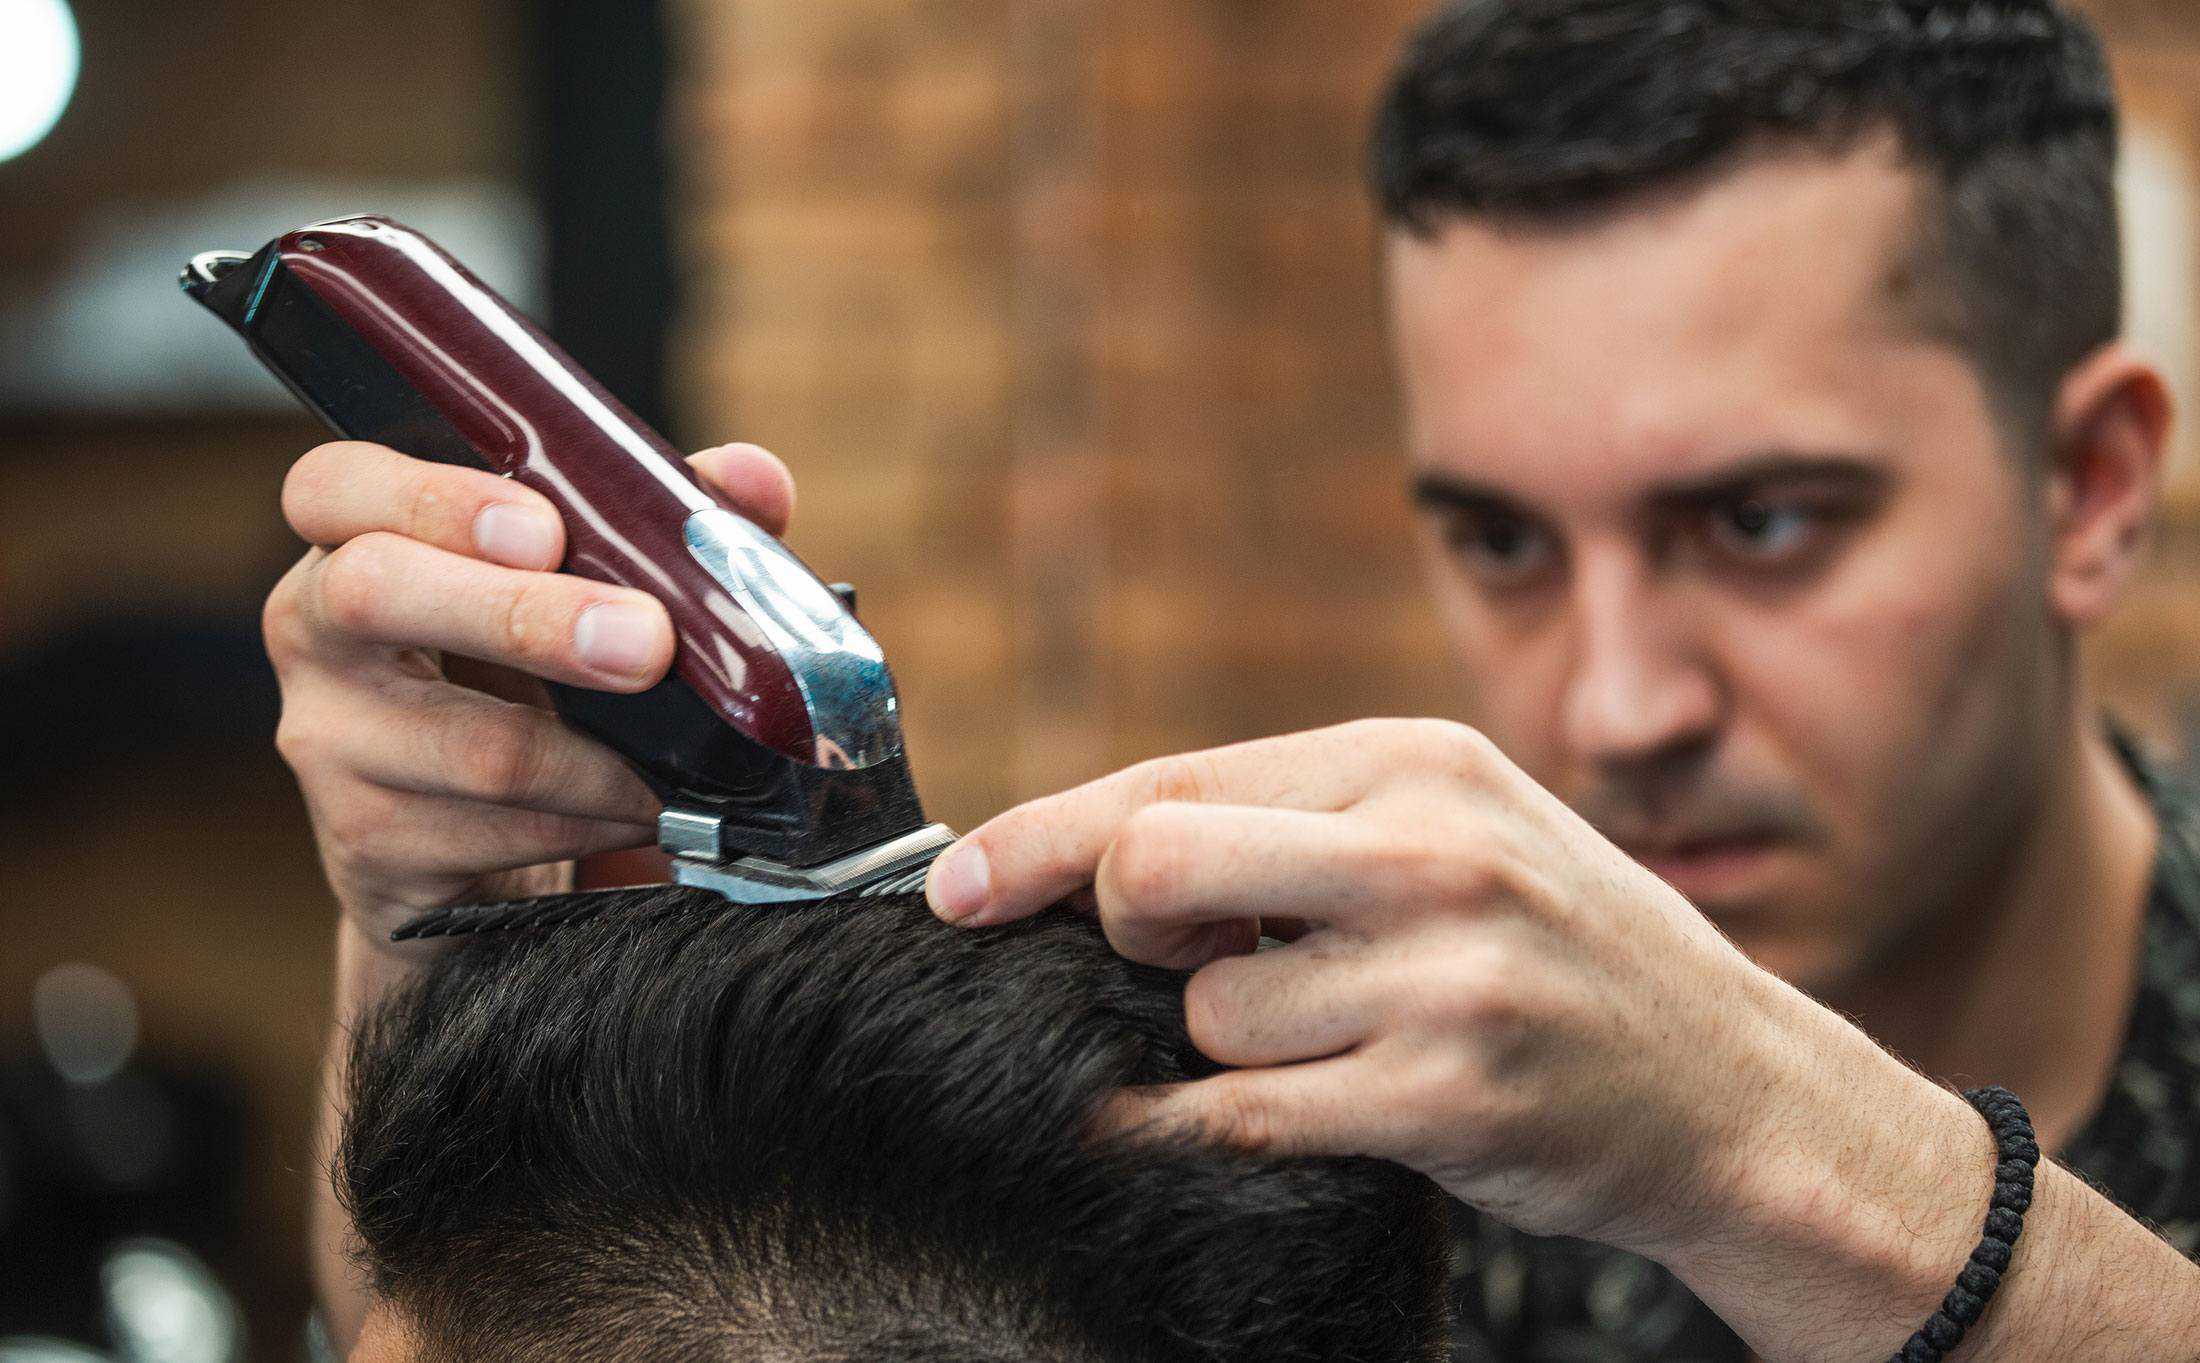 how to sharpen hair clippers at home